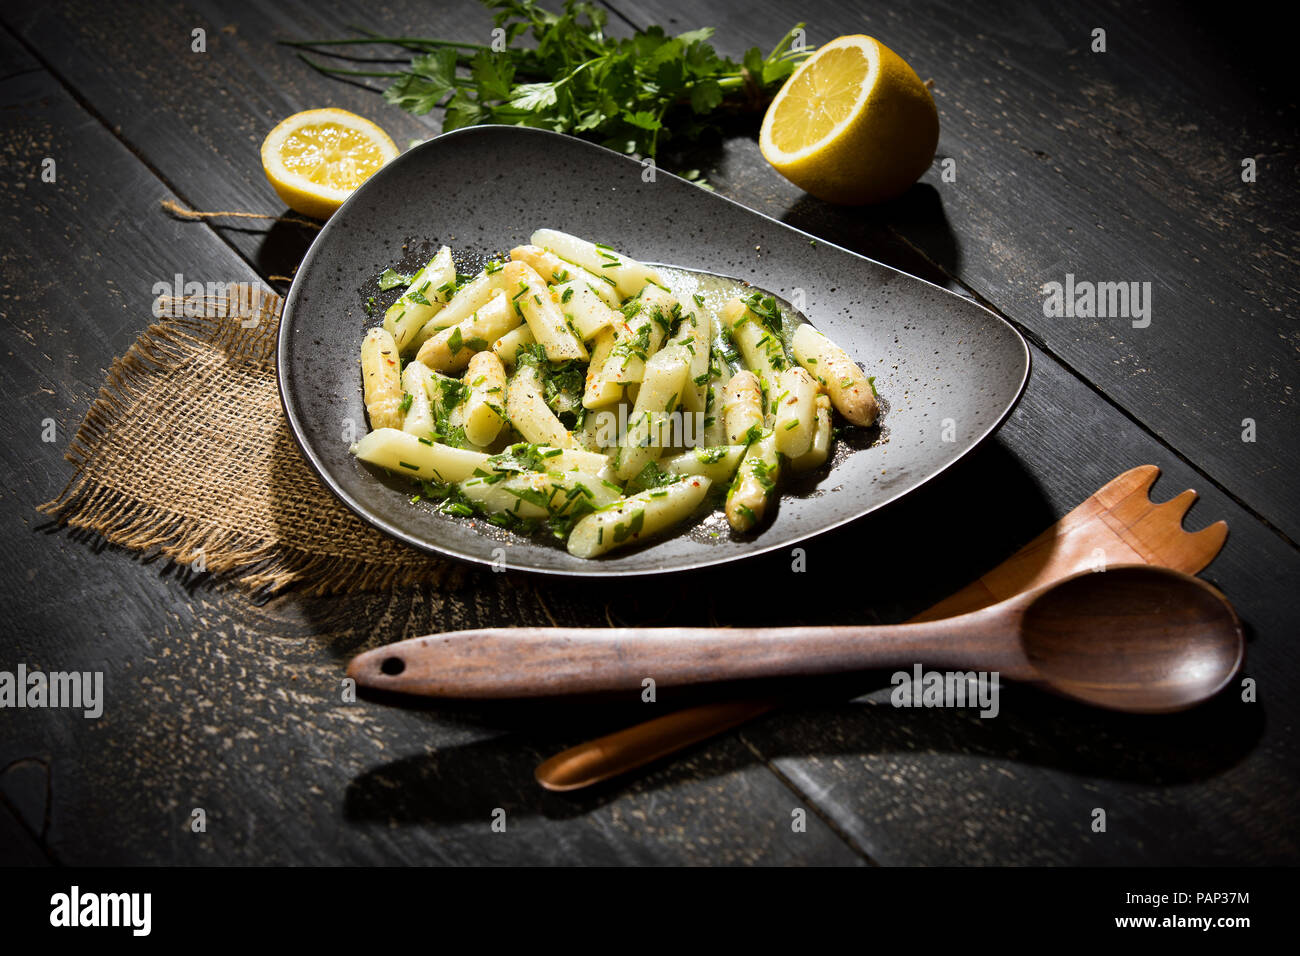 Asparagus salad with chives, parsley and vinaigrette Stock Photo